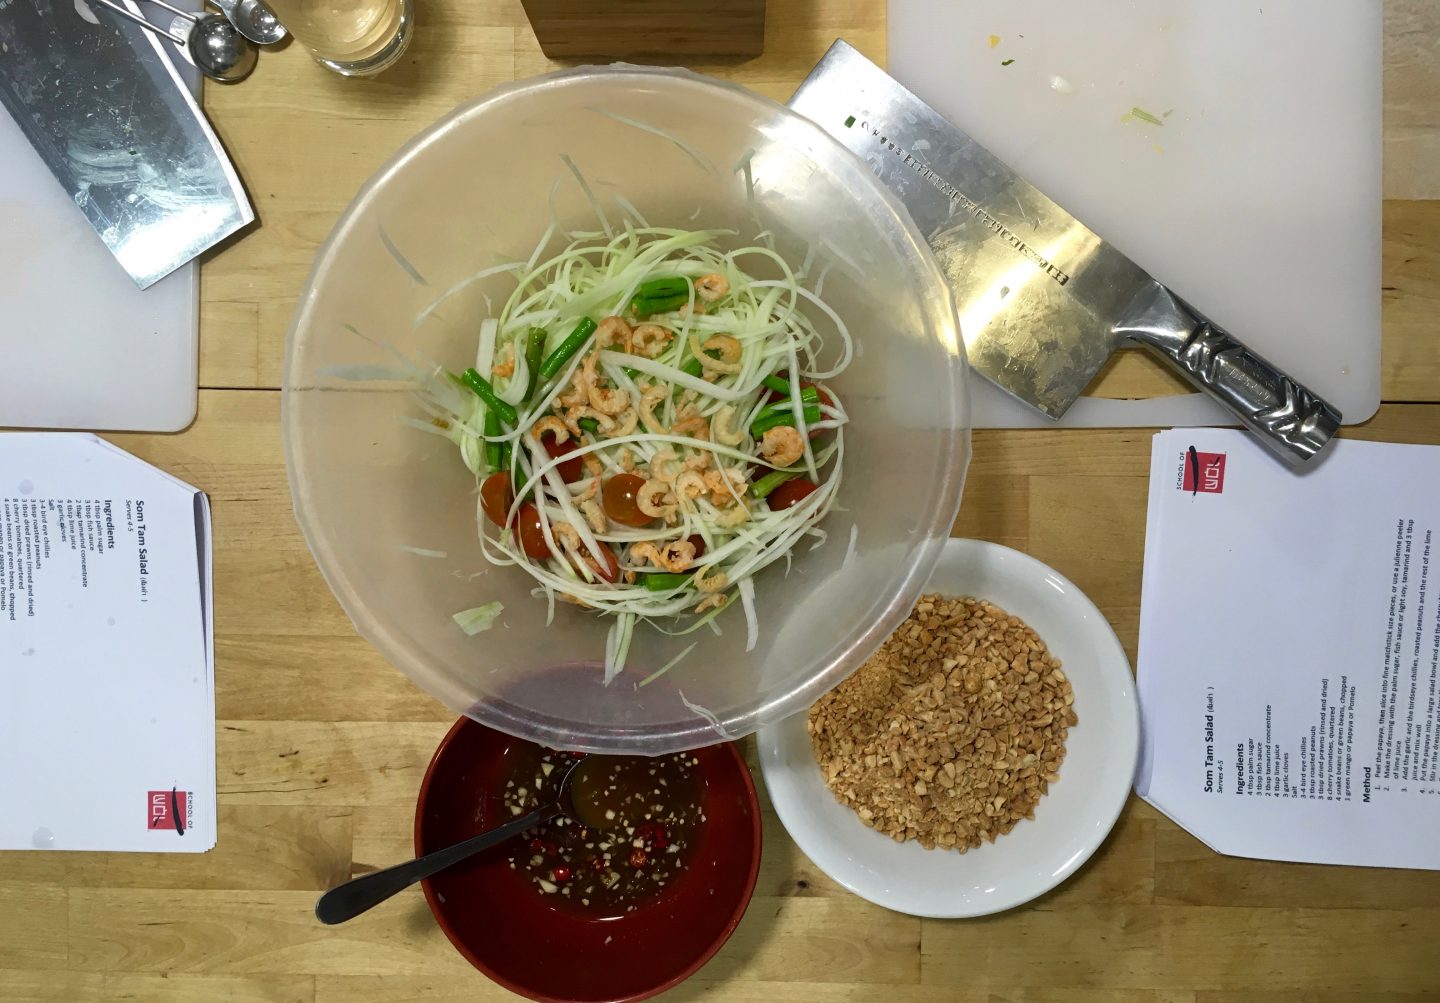 Learning to cook Thai food at the School of Wok in London